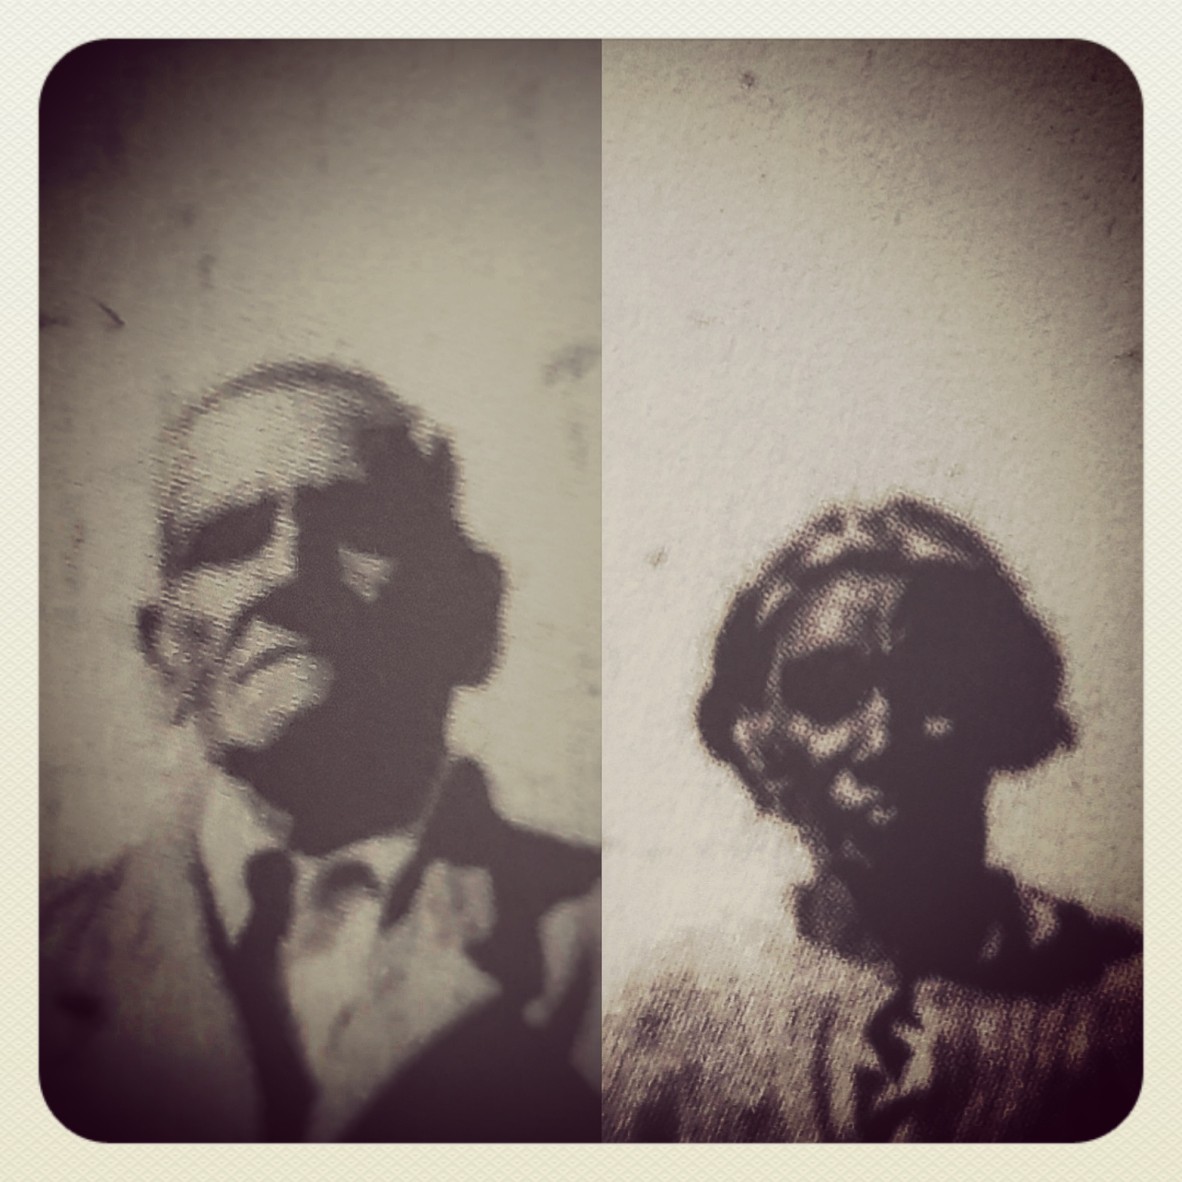 My Great Grandparents, Bindi West from Bollon, Qld and Terrisa Captain from Mitchell, Qld